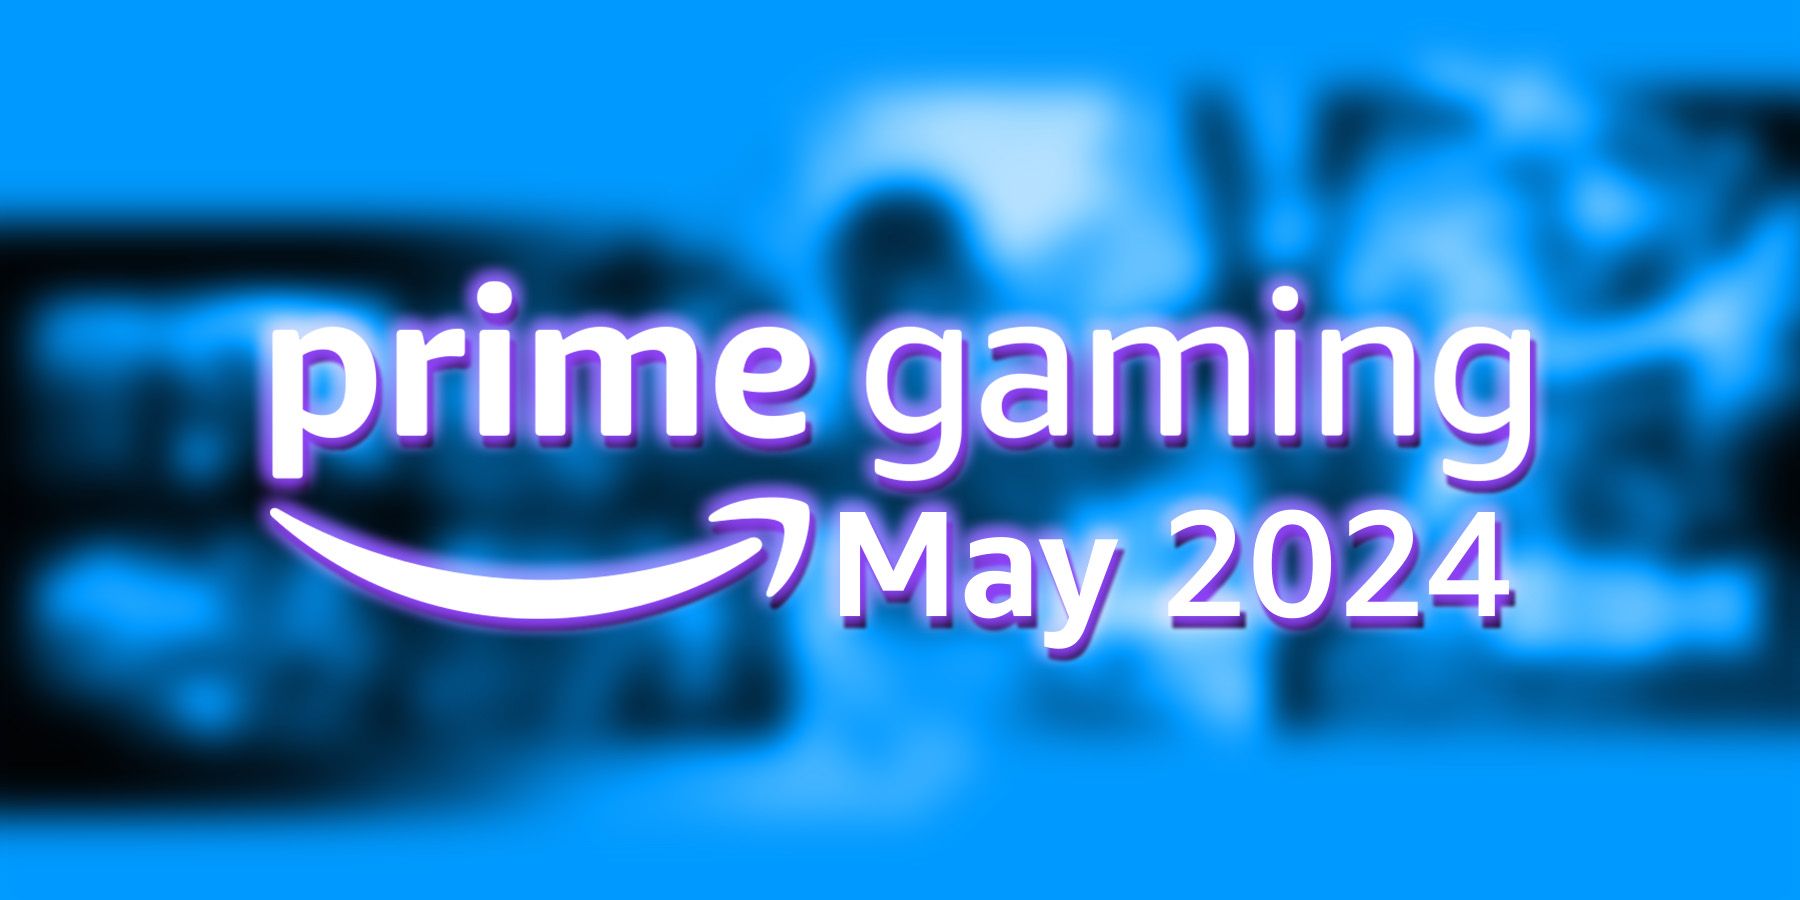 Amazon Prime Gaming May 2024 tagline on blue-tinted blurred game lineup collage